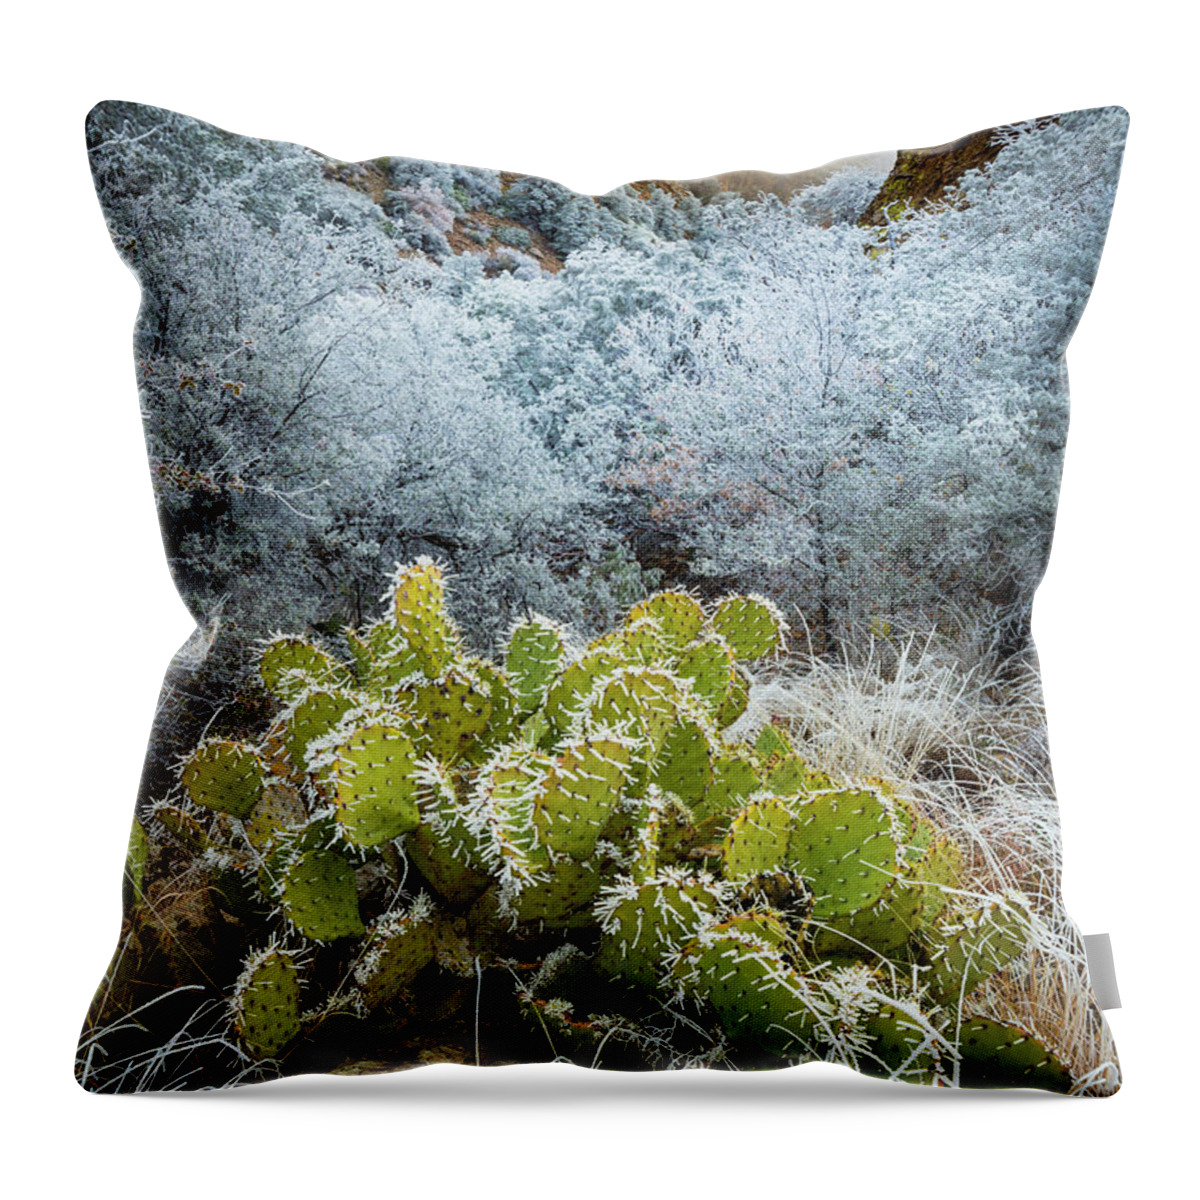 America Throw Pillow featuring the photograph Winter Cacti by Inge Johnsson